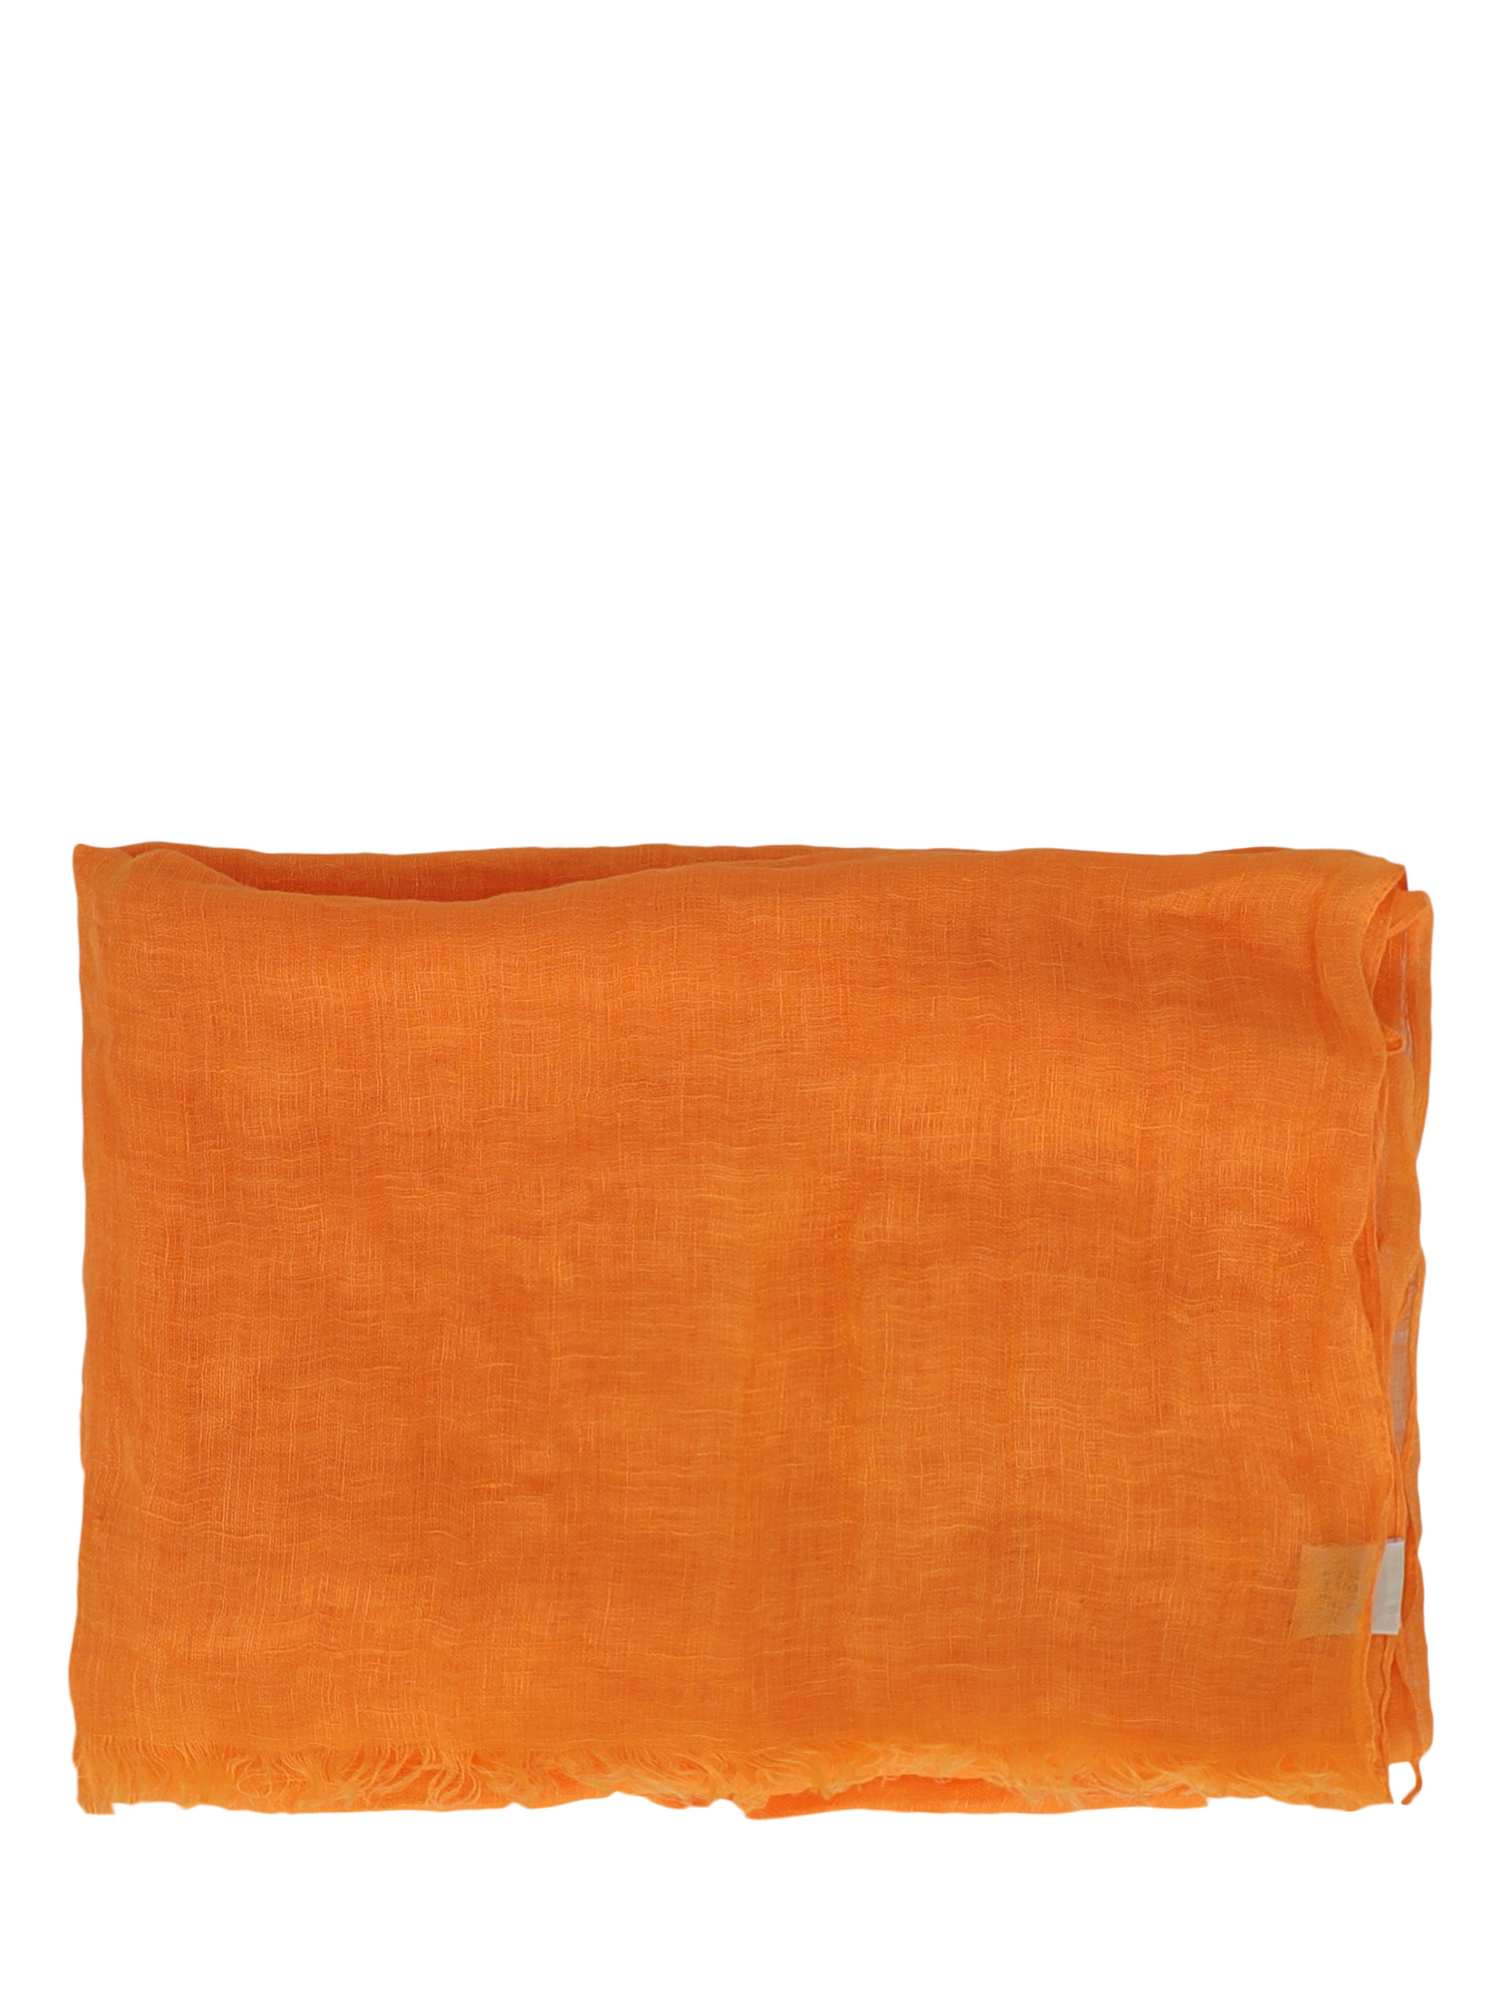 Condition: New With Tag, Solid Color Fabric, Color: Orange -  -  -